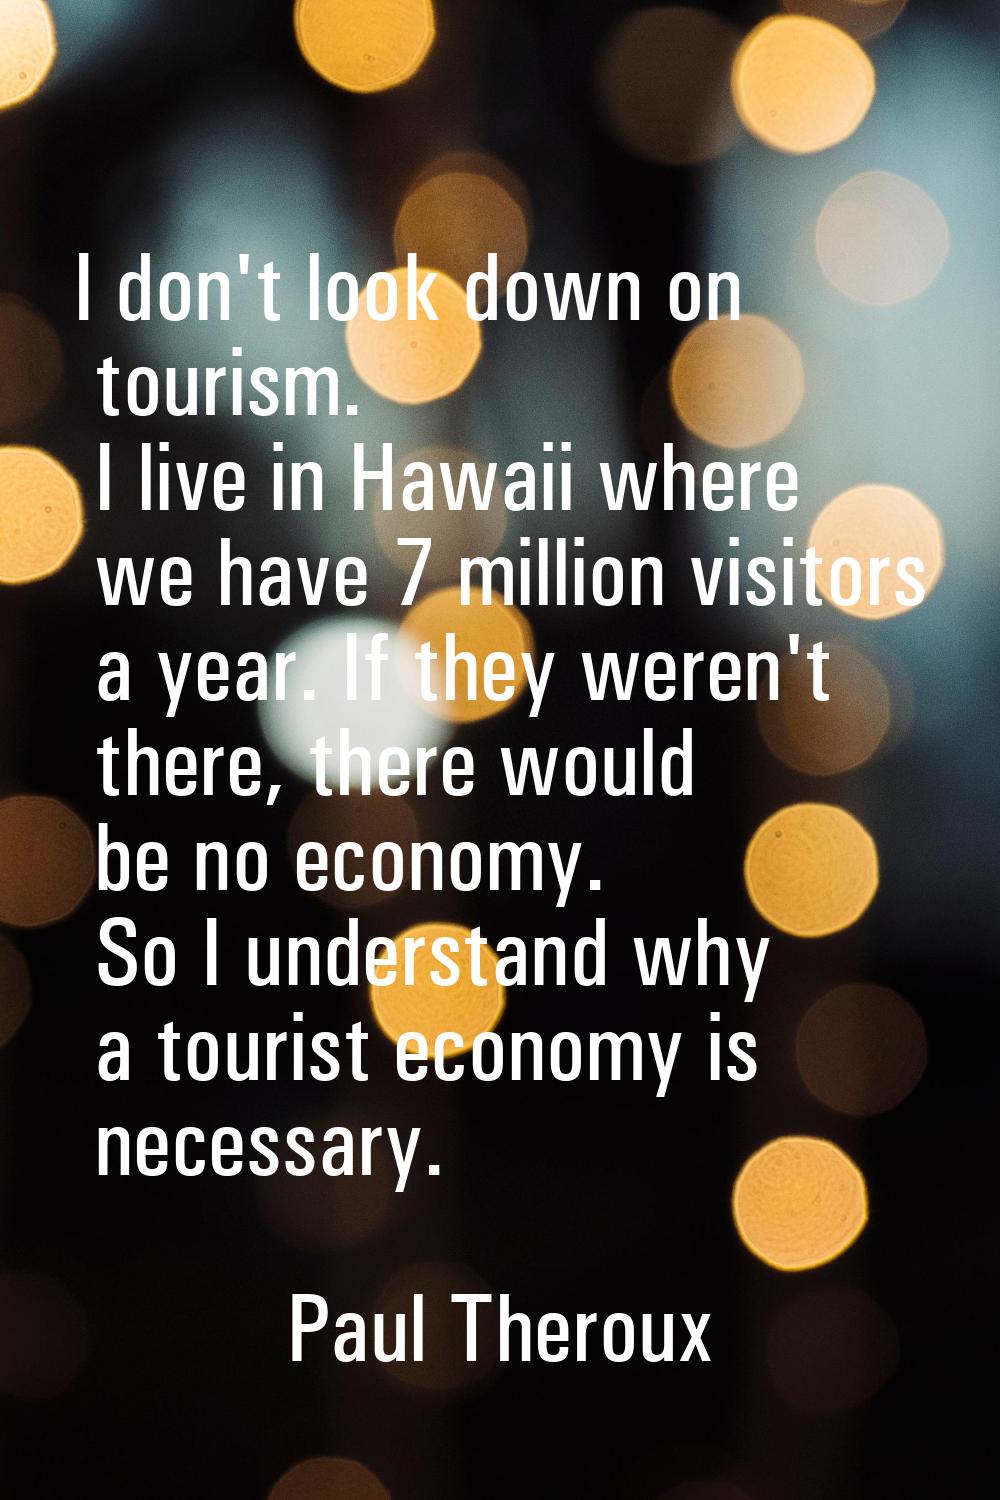 I don't look down on tourism. I live in Hawaii where we have 7 million visitors a year. If they wer